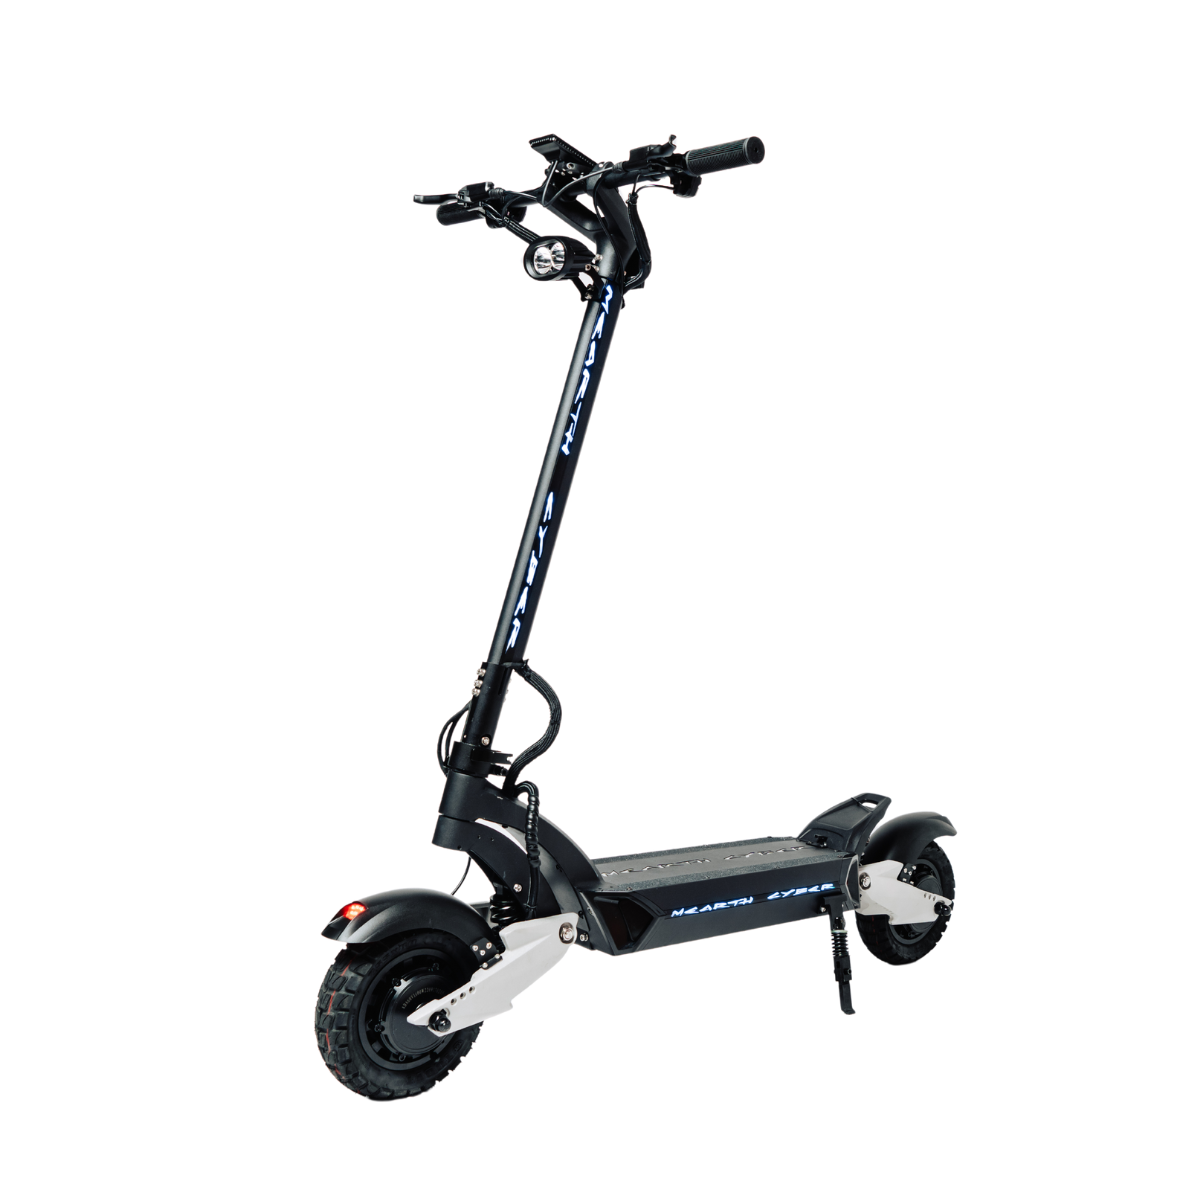 Mearth Electric Scooter Cyber 